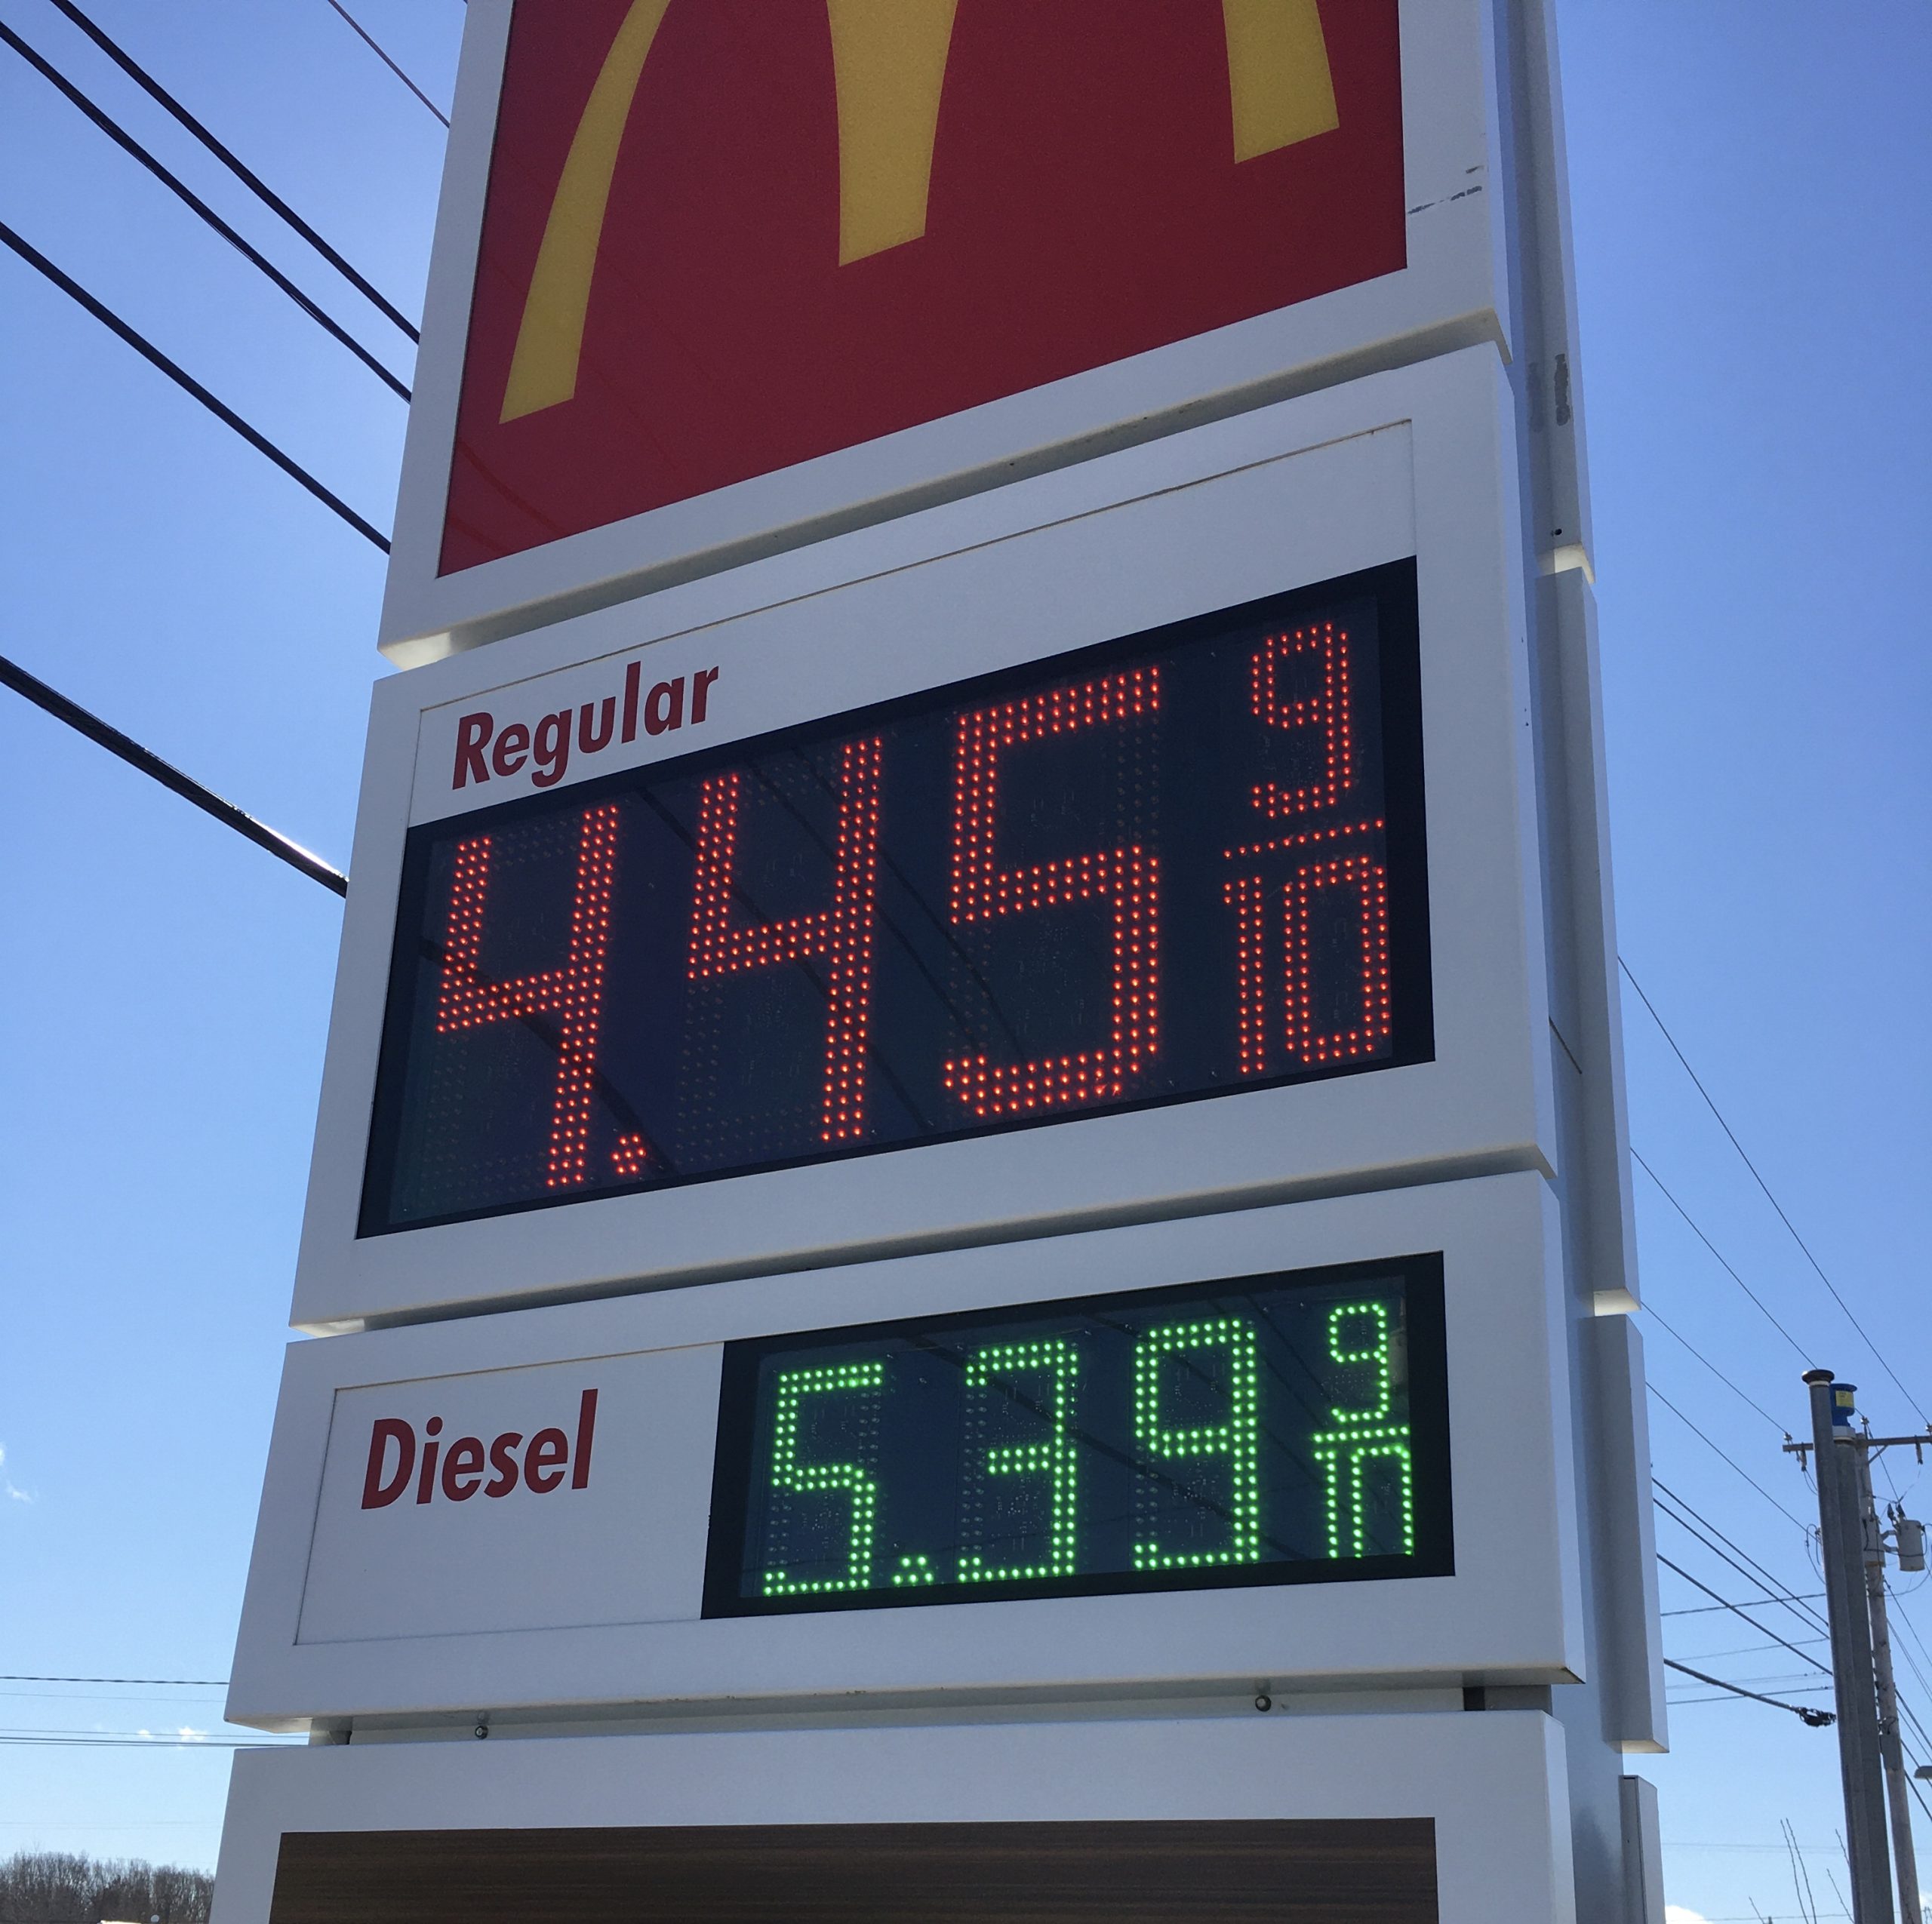 How Much Are You Paying For a Gallon of Gas These Days?